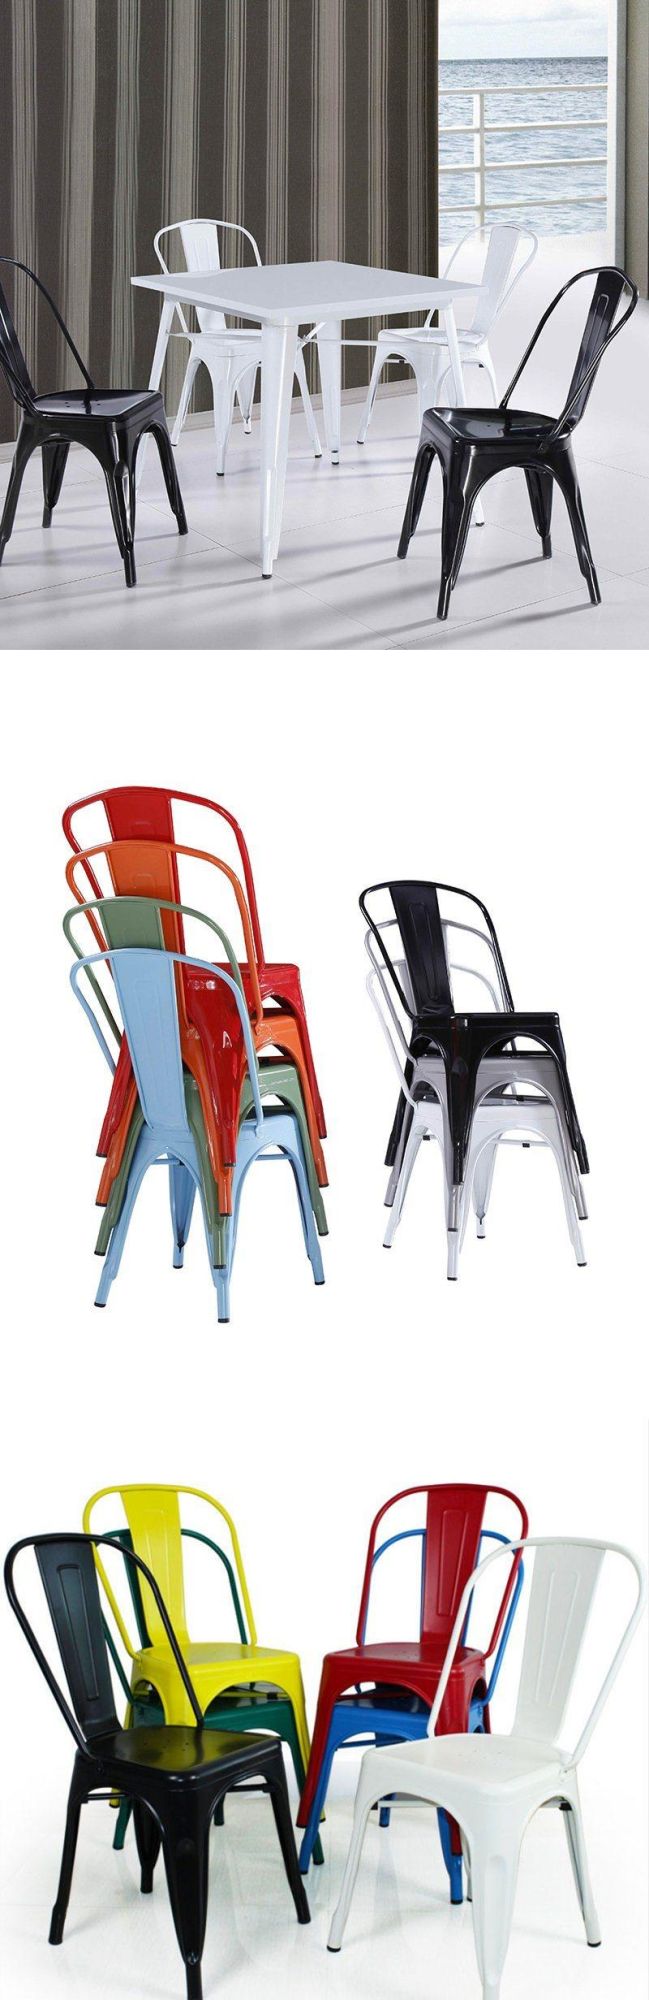 Modern Home Restaurant Kitchen Furniture Stackable Metal Chair for Garden and Outdoor Use